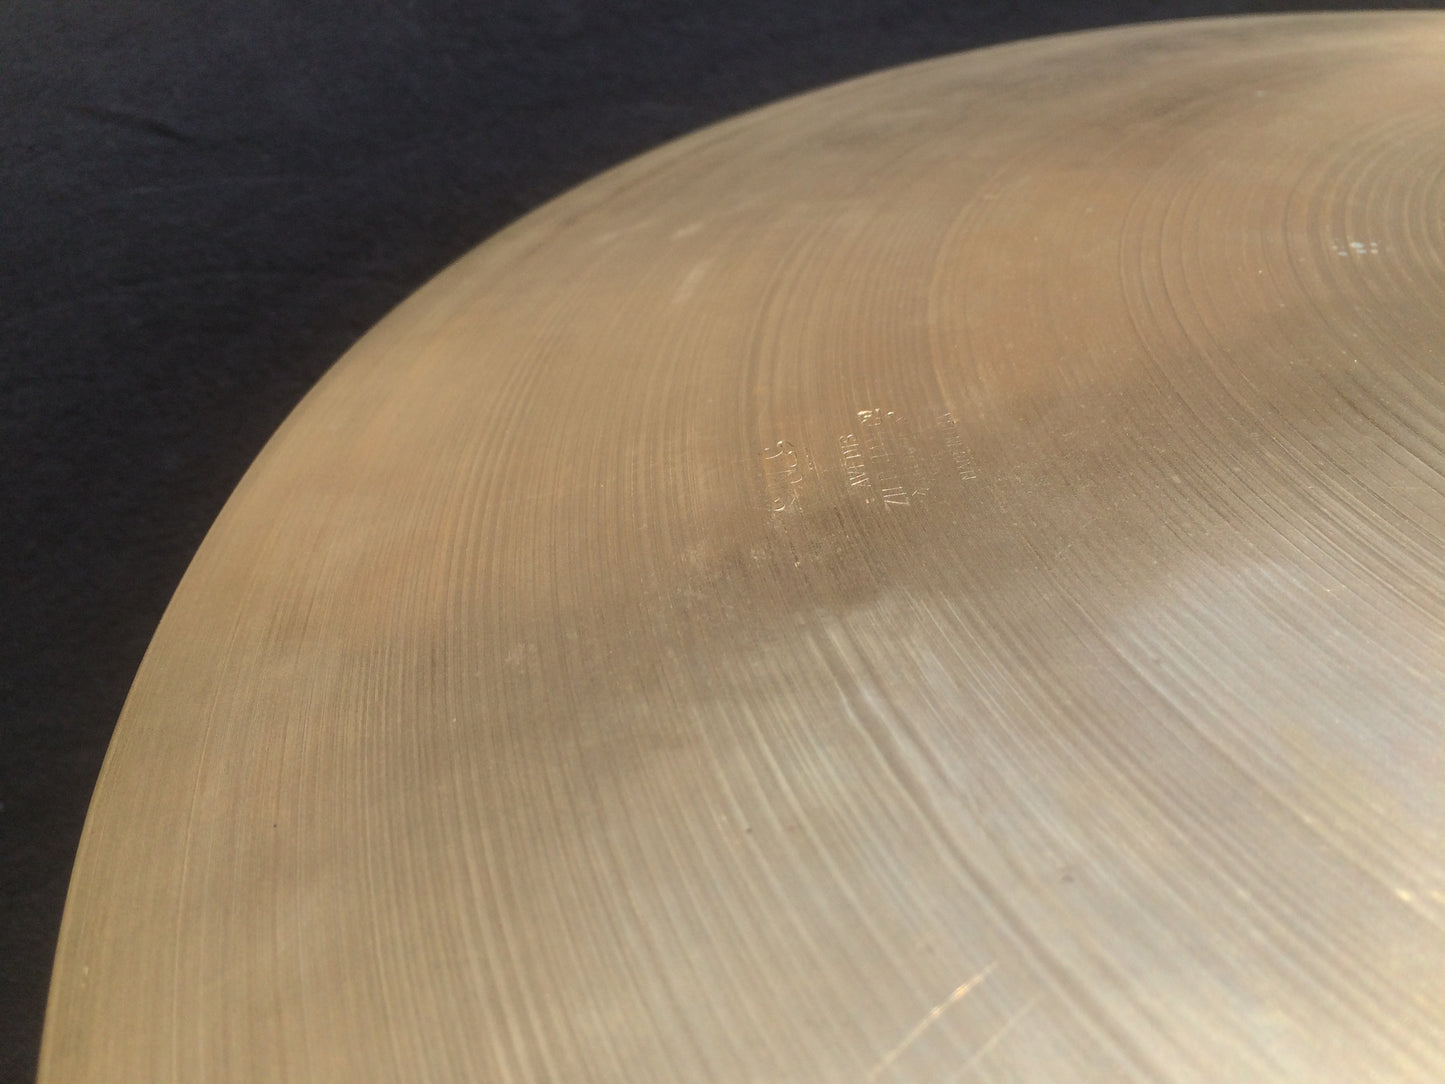 21″ Zildjian A 1950s Trans Stamp "Sweet Ride" Ride Cymbal 2144g – Inventory # 171